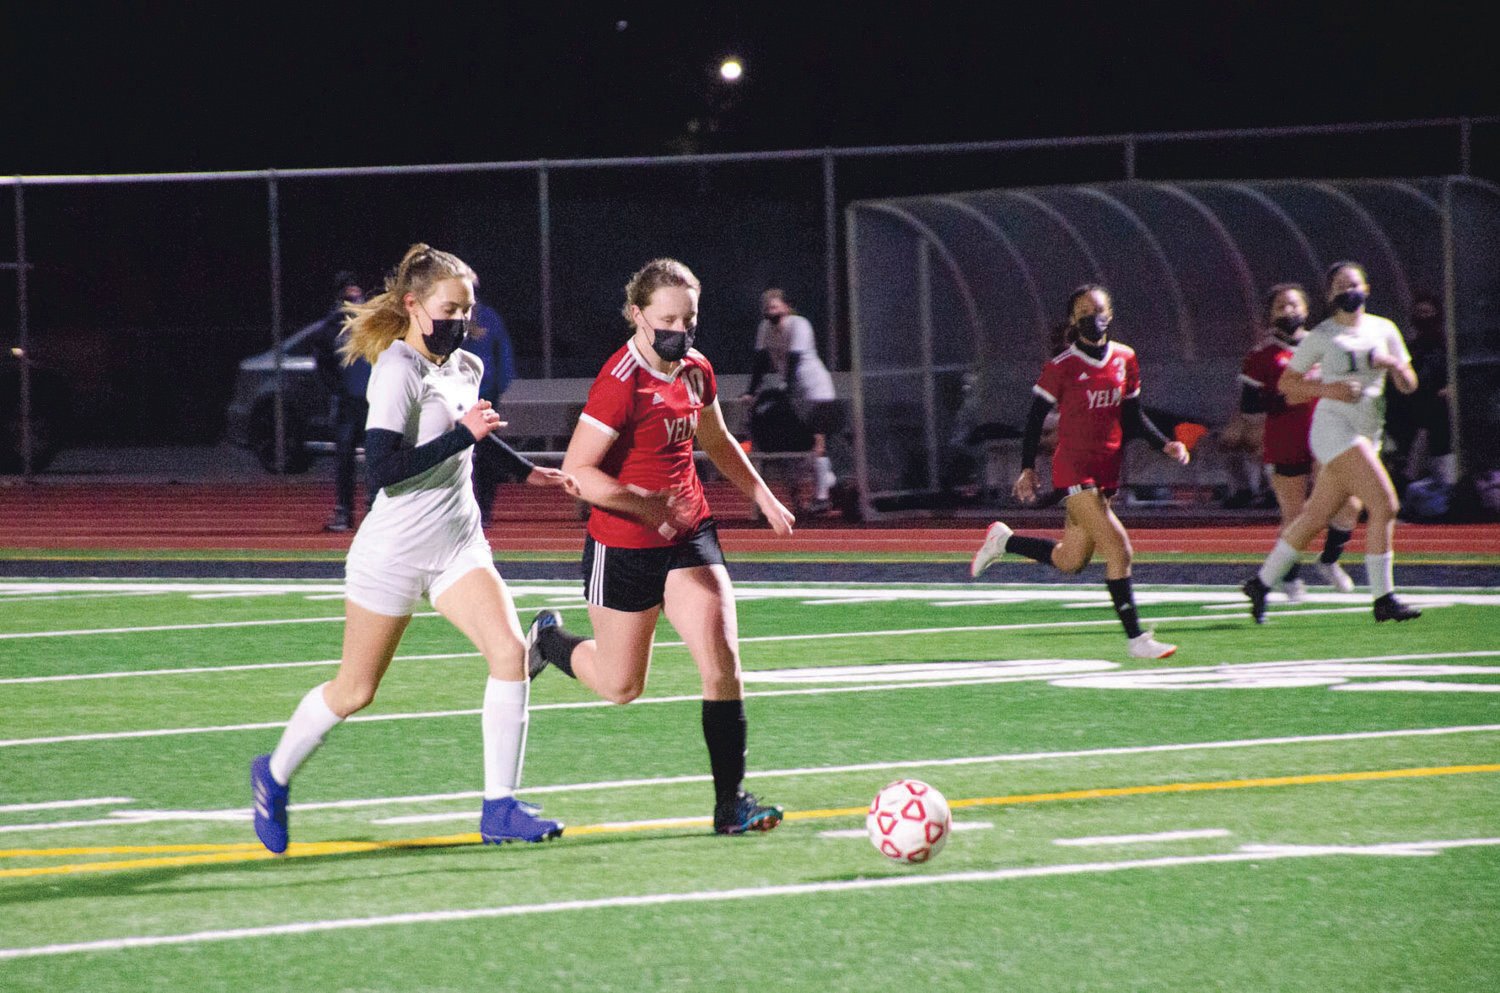 Jordyn Rabalais, of Yelm, was a first-team all-league selection in the 3A South Sound Conference.